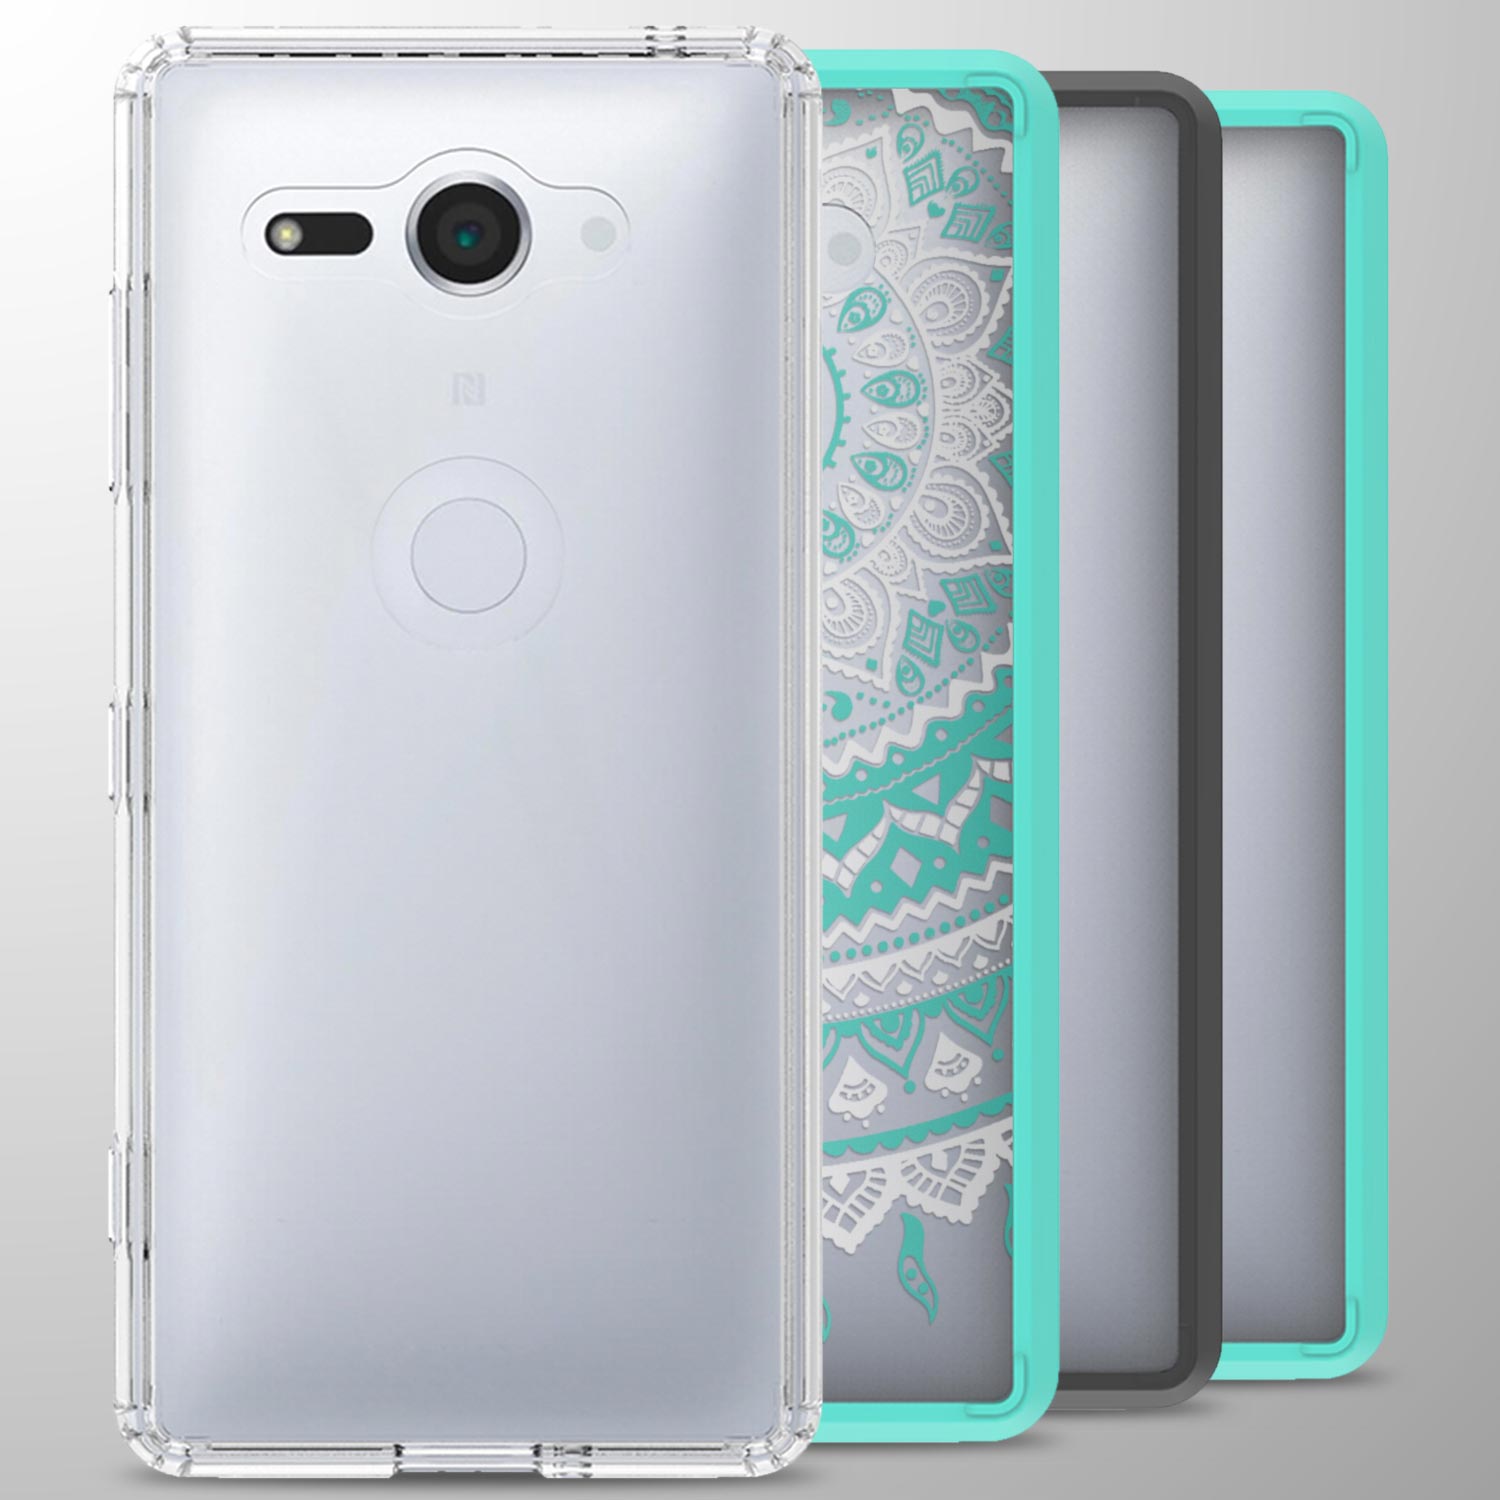 For Sony Xperia Xz2 Compact Case Hard Back Bumper Slim Shockproof Phone Cover Ebay